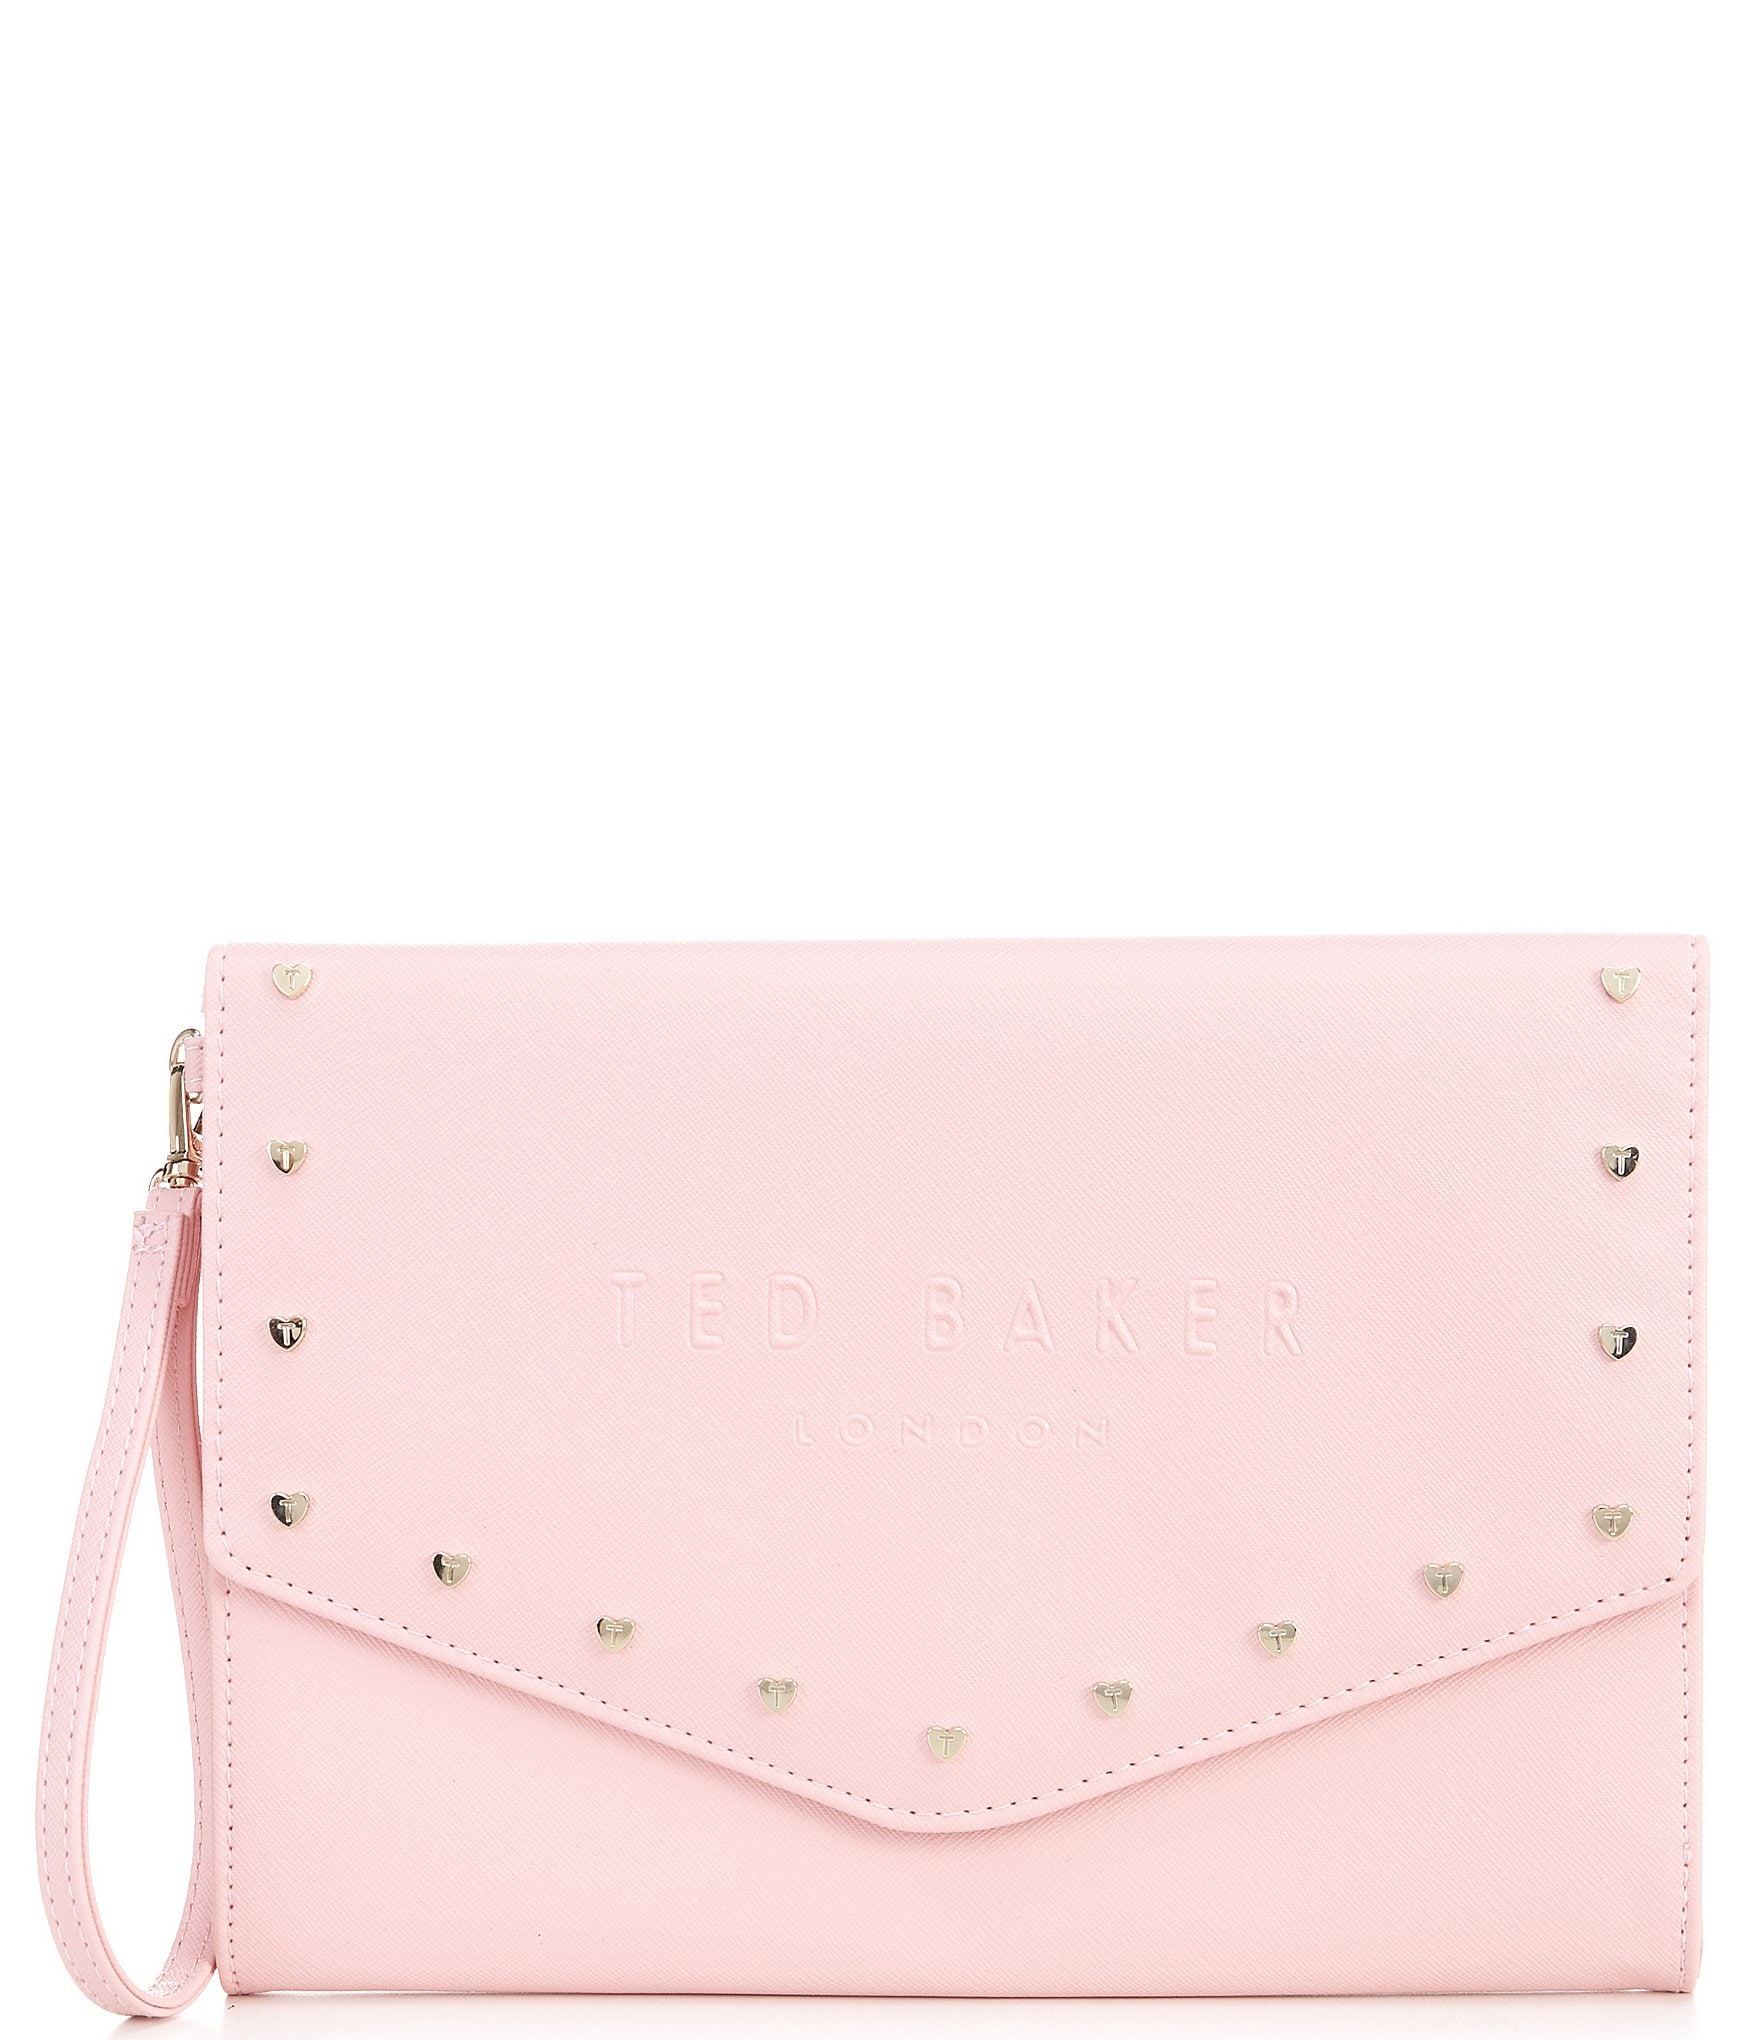 NWT - Ted Baker London - LUANNE - Bow Envelope Pouch - Rose Gold - $49